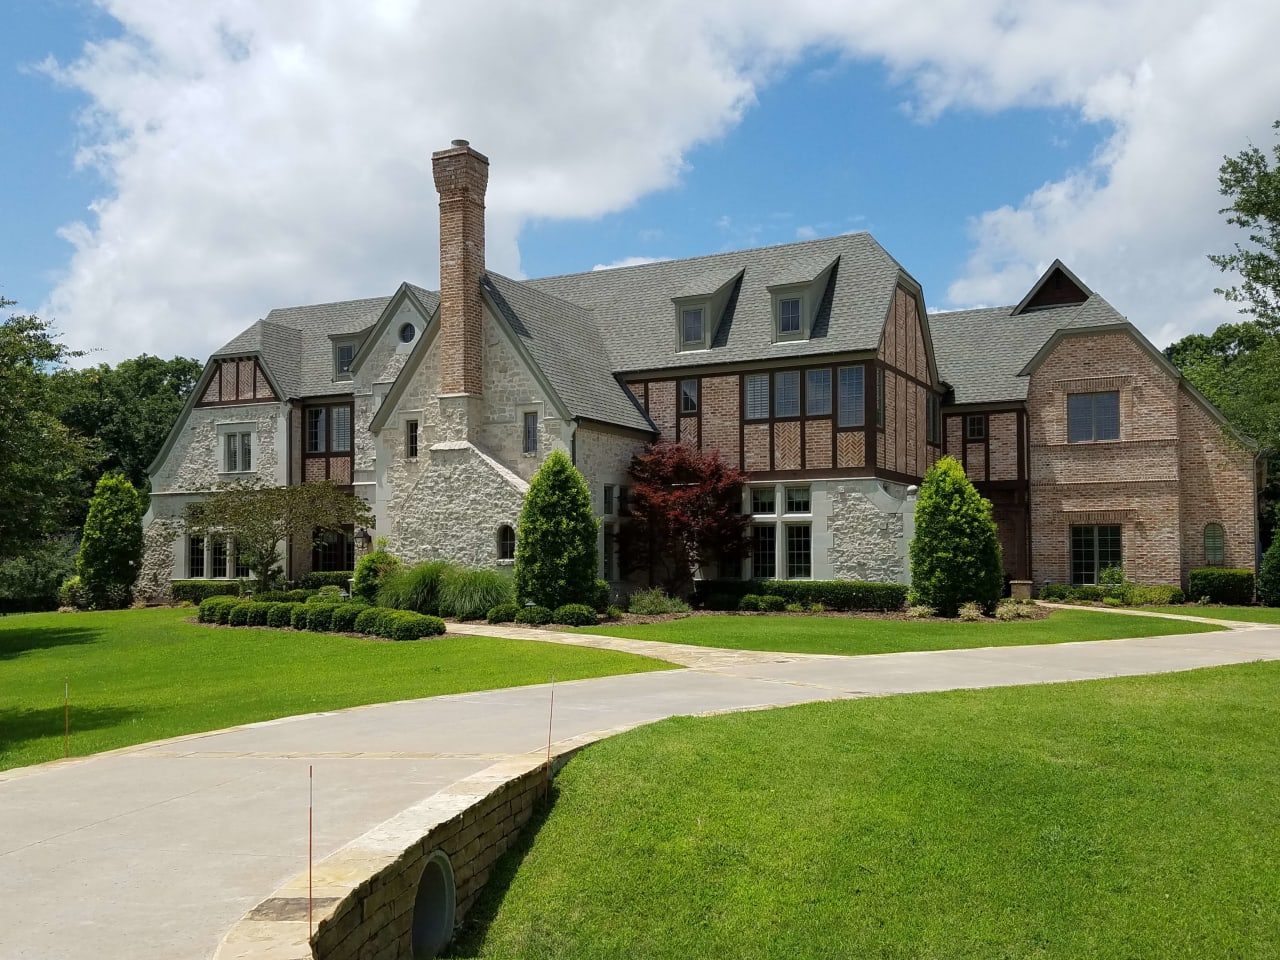 Our Top 53 Fairview Luxury and Estate Home Sales